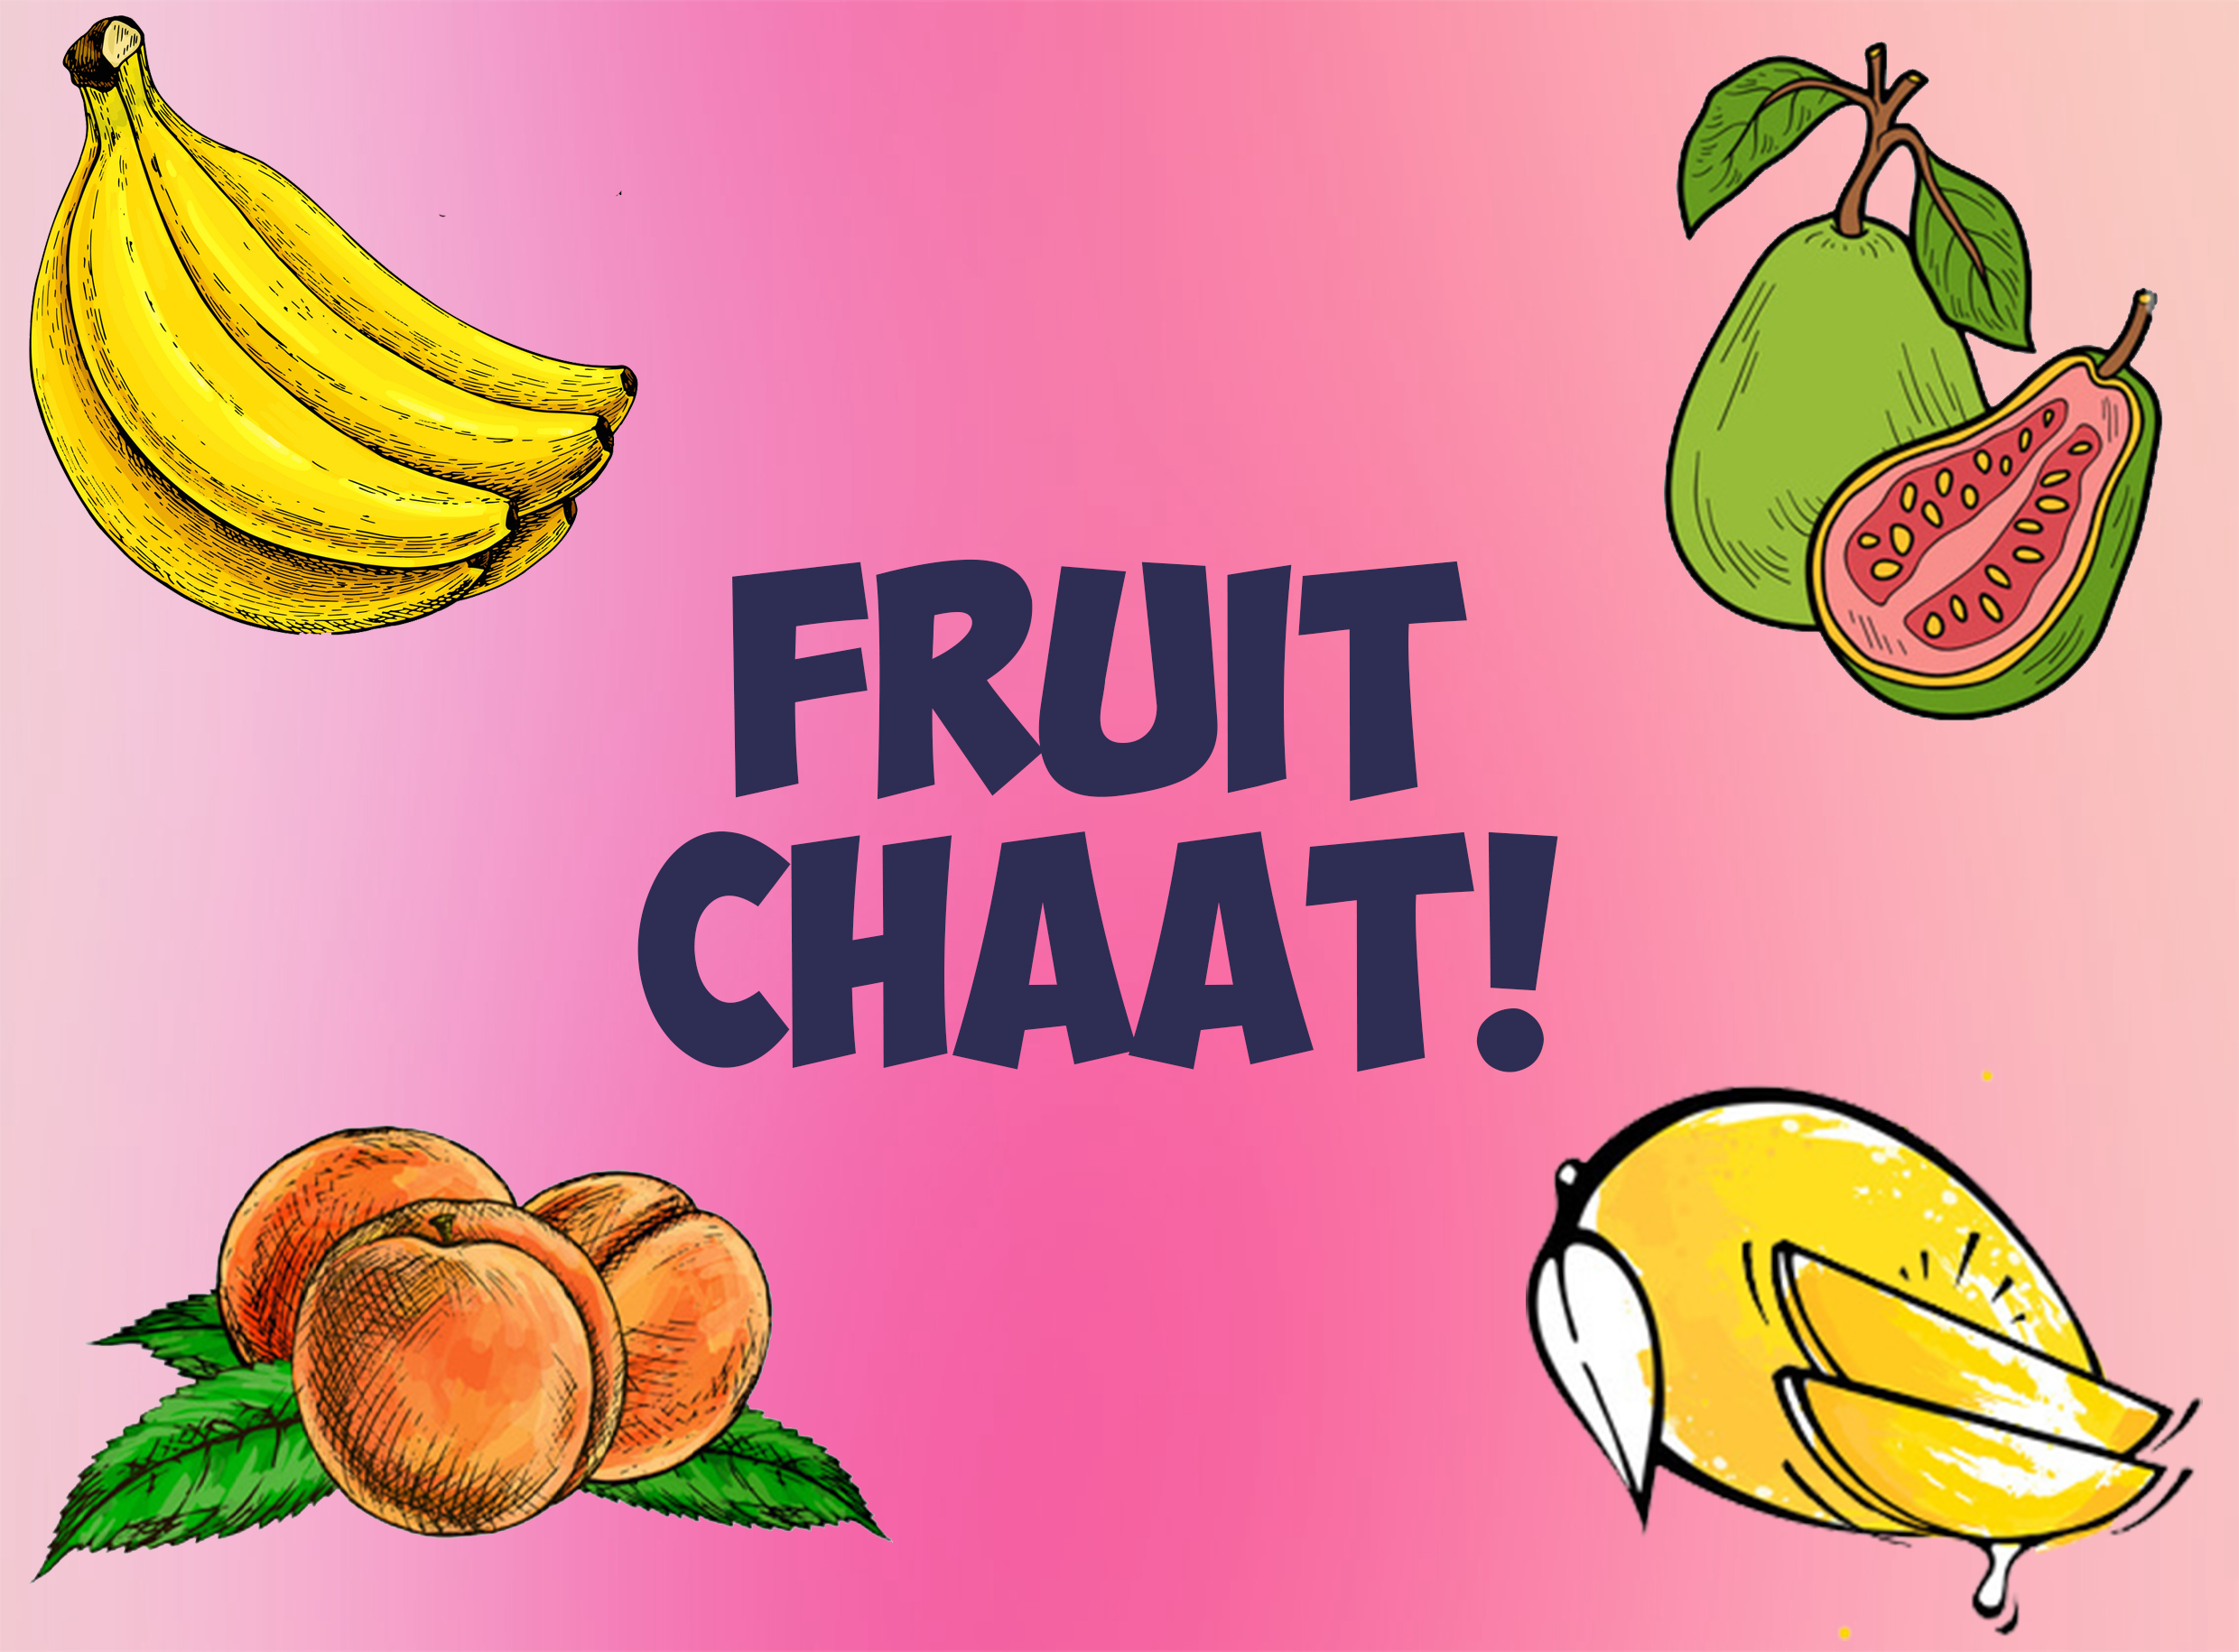  Two Ways to Amp Up Your Boring Fruit Chaat Recipe!